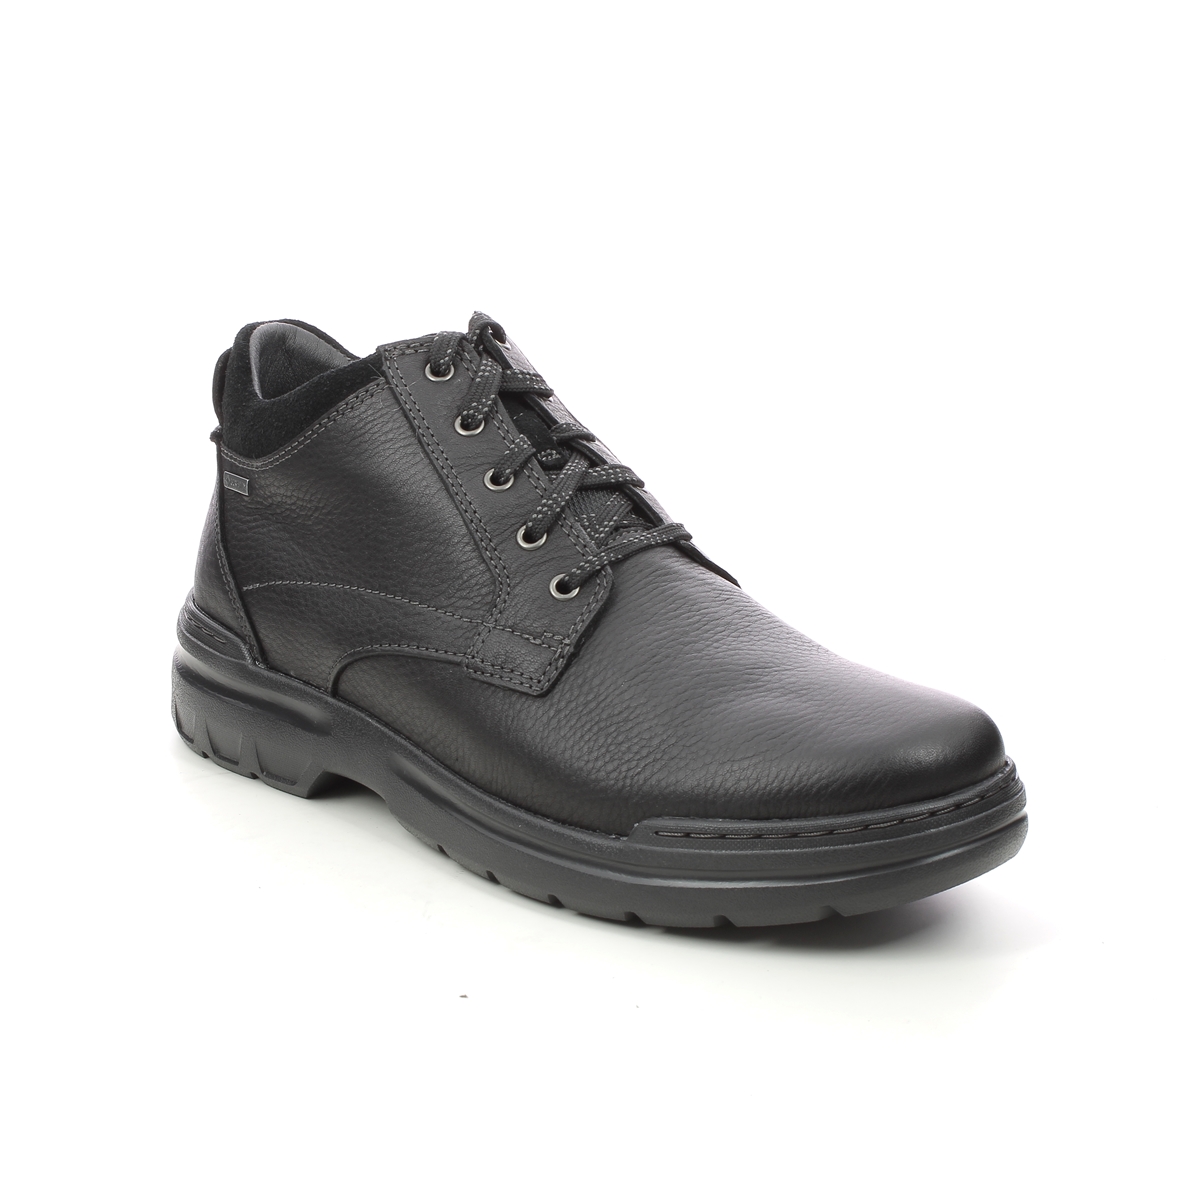 Clarks Rockie 2 Up Gtx Black Leather Mens Boots 612568H In Size 9.5 In Plain Black Leather H Width Fitting Extra Wide